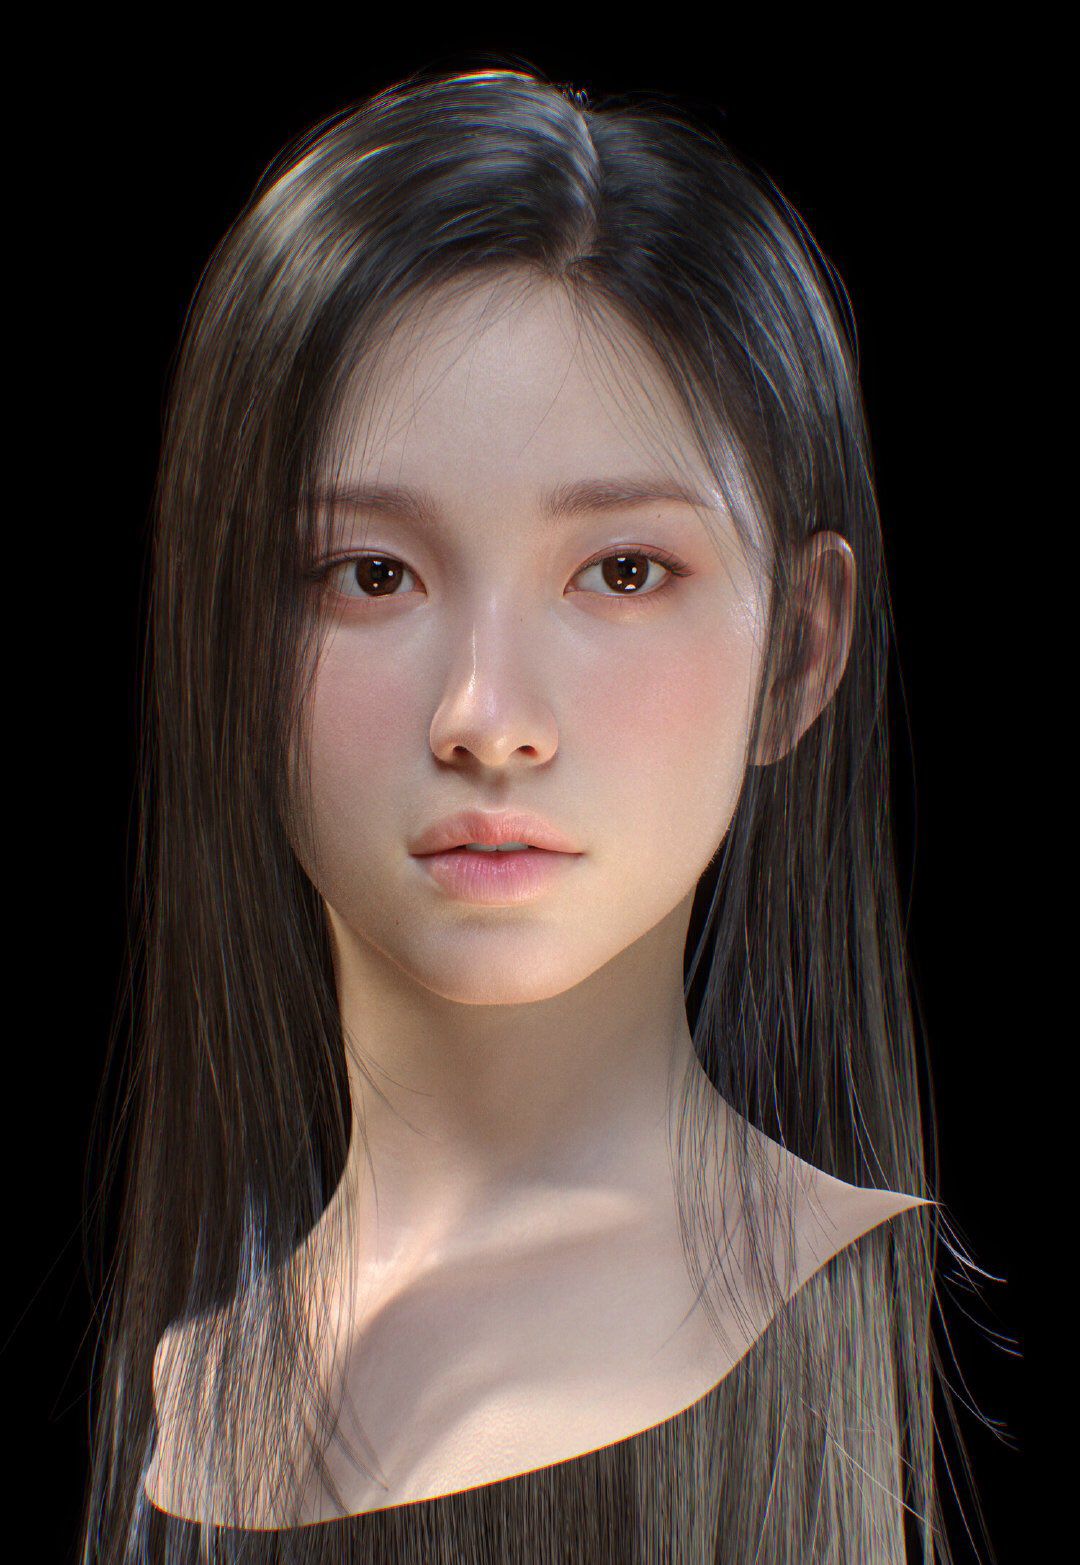 【Good news】Beautiful girl in 3DCG finally becomes indistinguishable from human 1